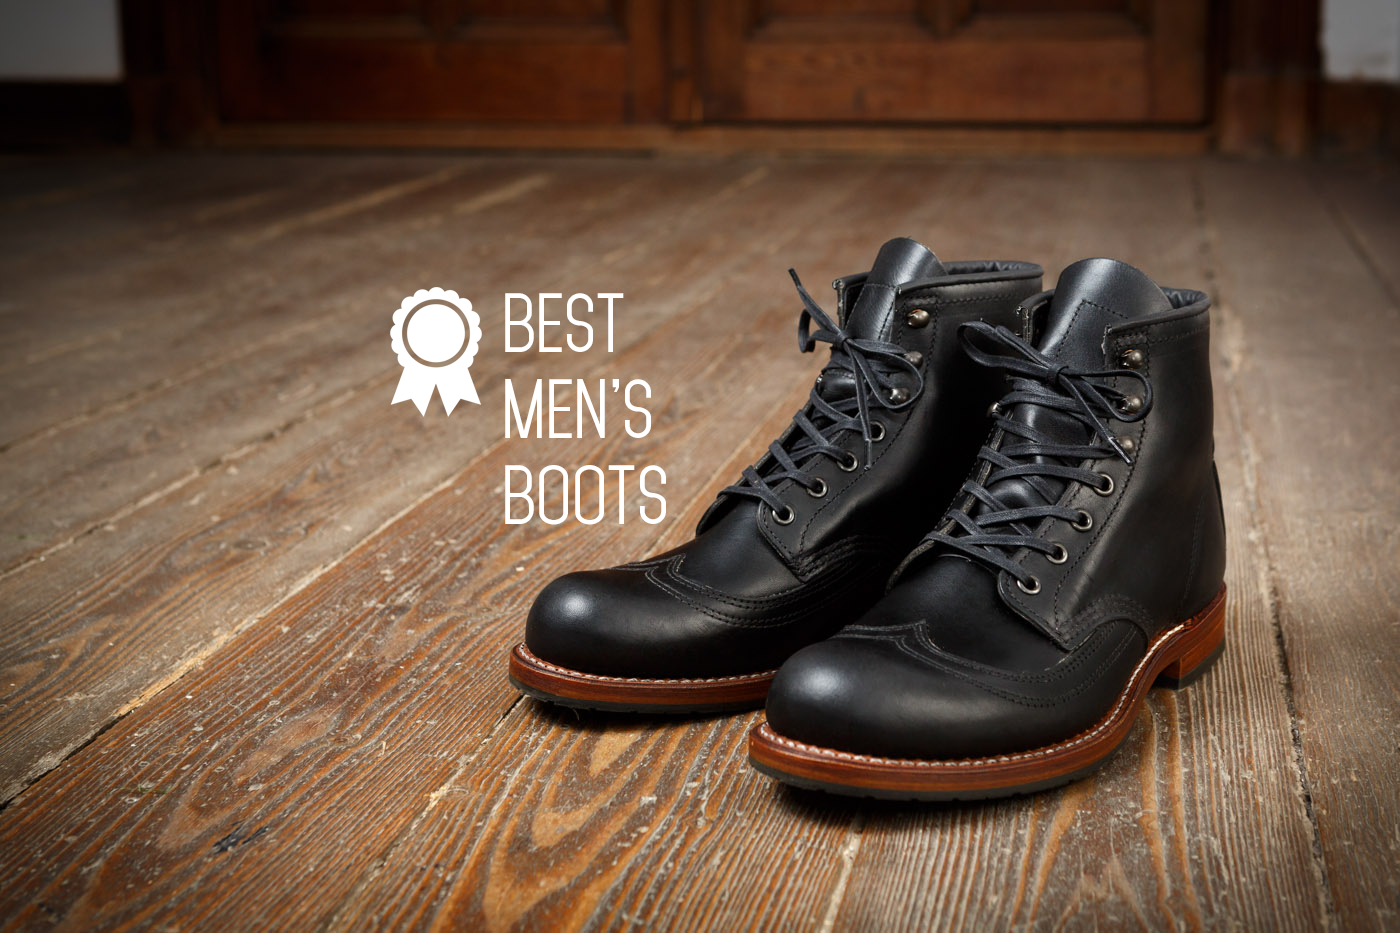 The 10 best men's boots - Buy This Once | Durable, high quality ...